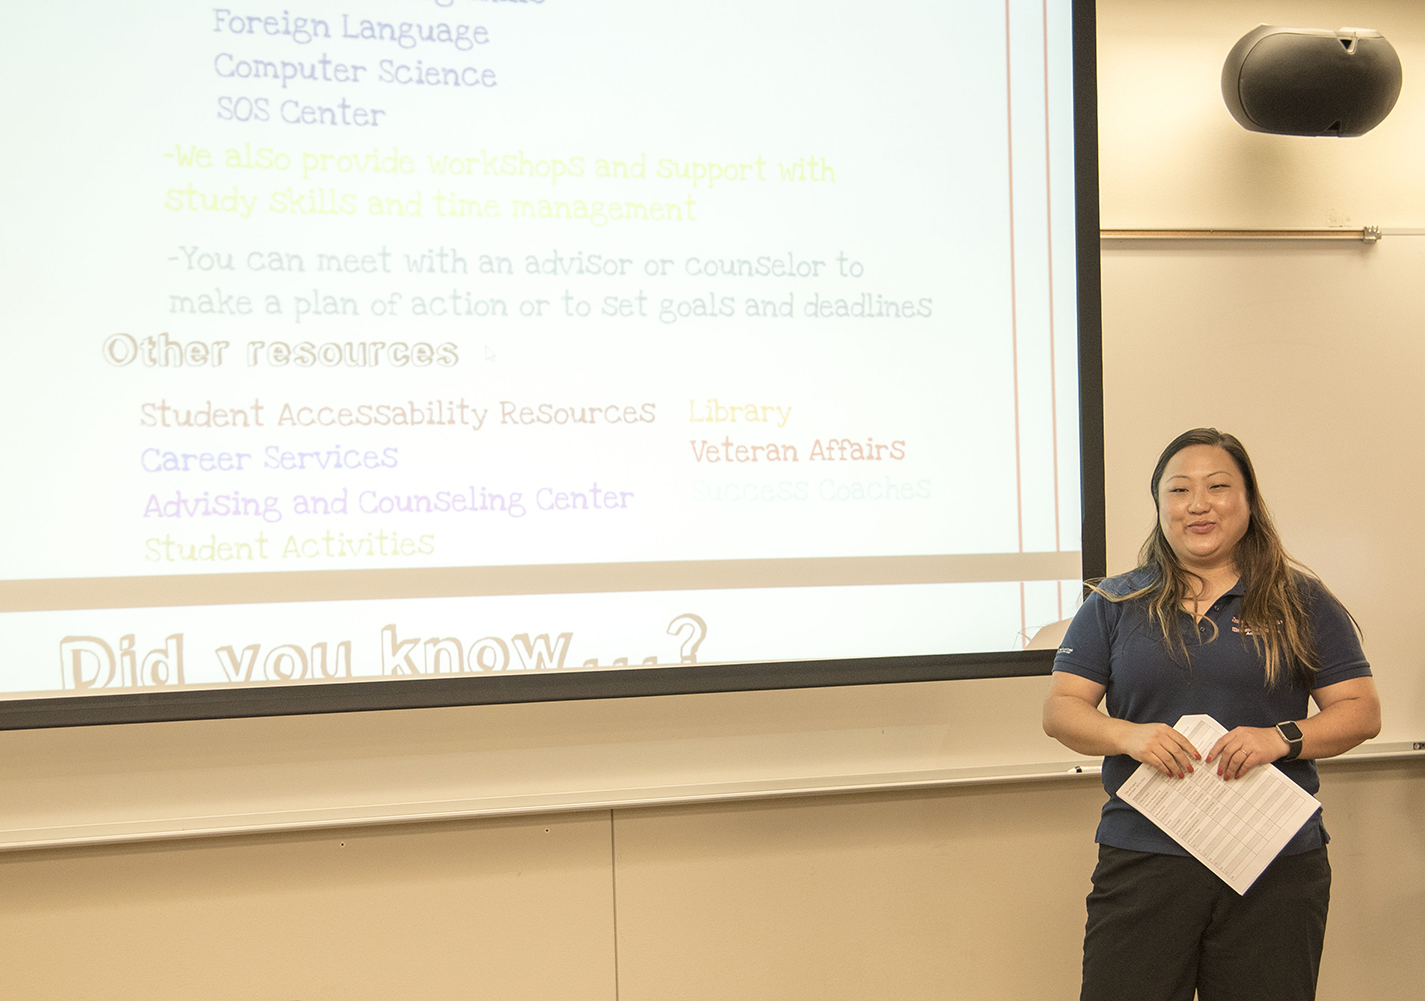 NE academic advisor Amy Reece discusses tips and tools to combat procrastination during a presentation Oct. 16. Some of the tips were about avoiding burnout, taking breaks and minimizing distractions.